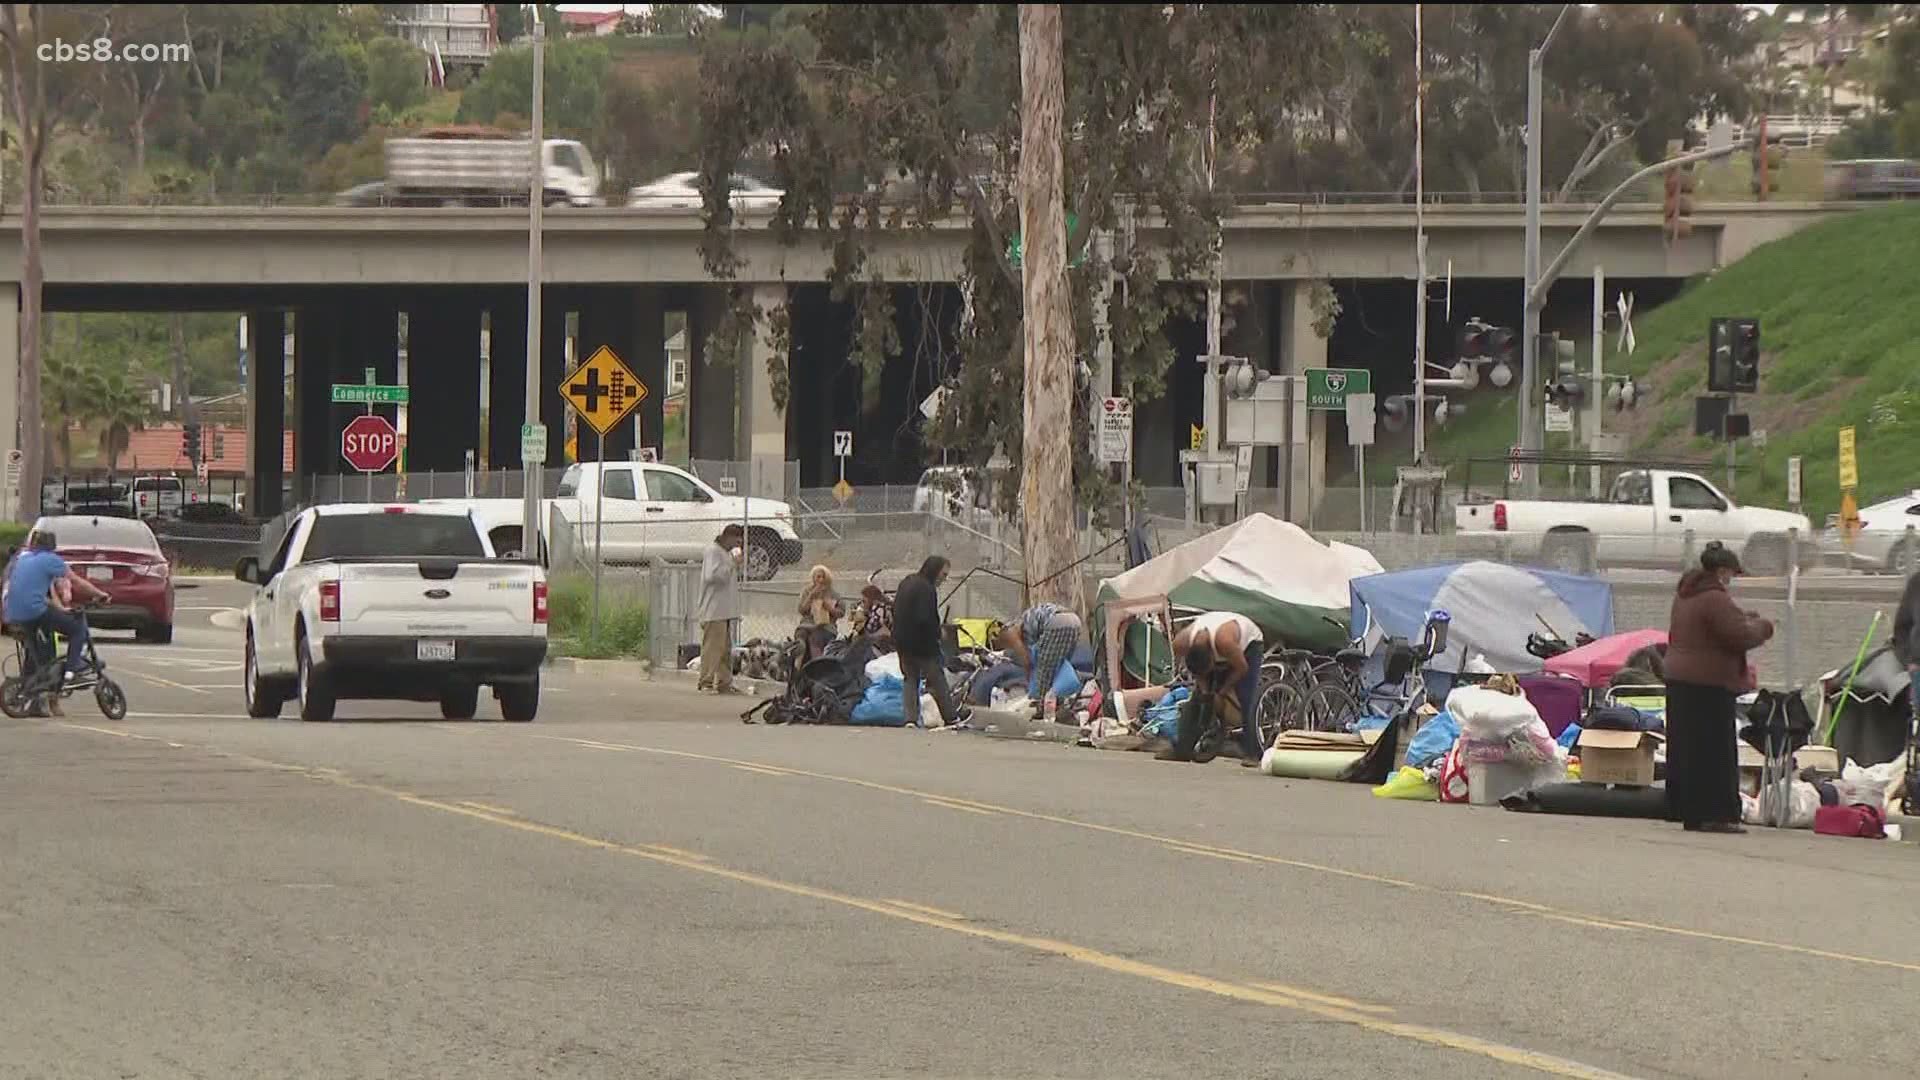 For months, residents and business owners complained about the encampment’s conditions as it grew larger, creating a public health concern.